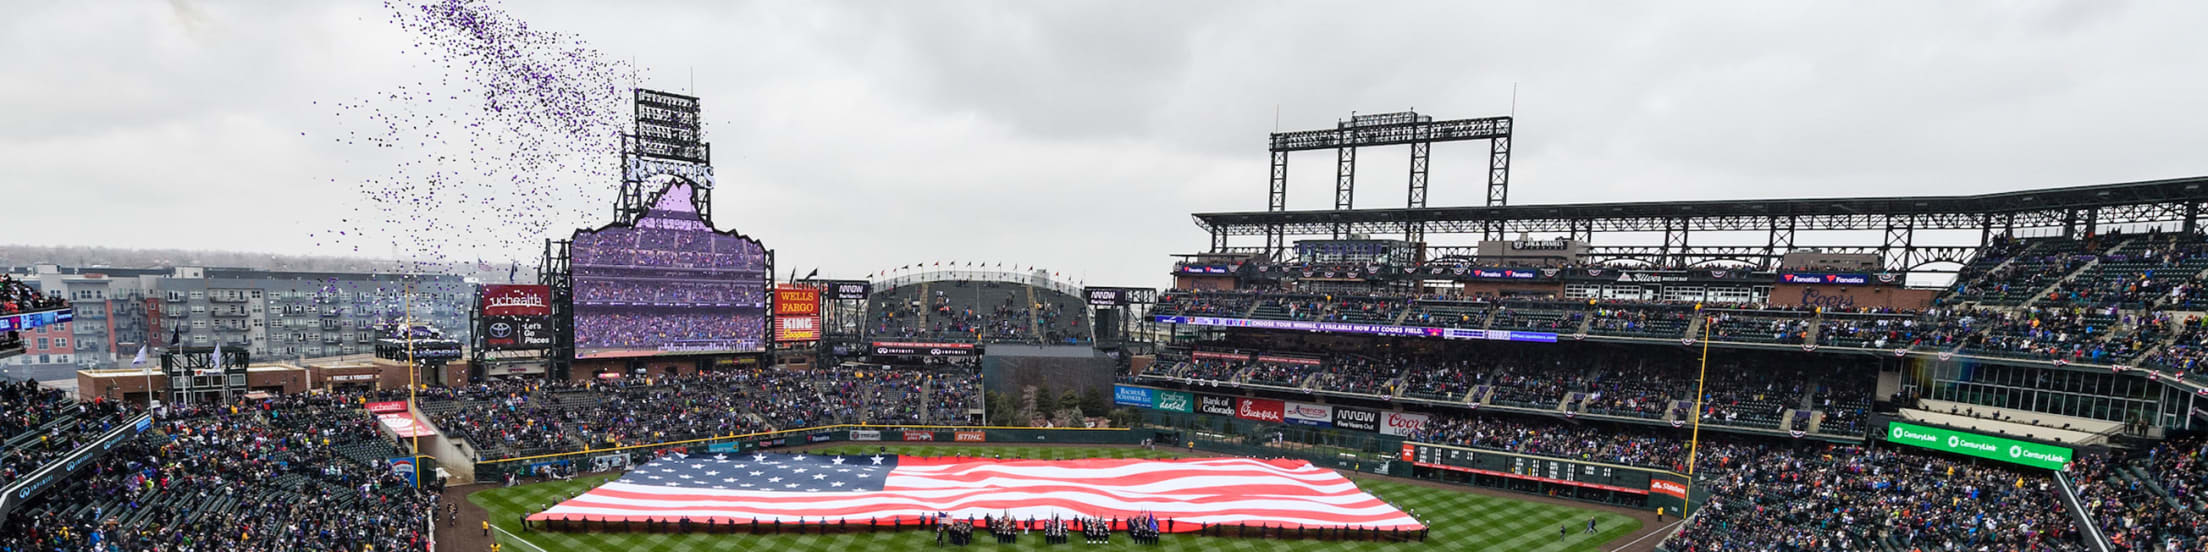 Opening Day at Coors Field Colorado Rockies